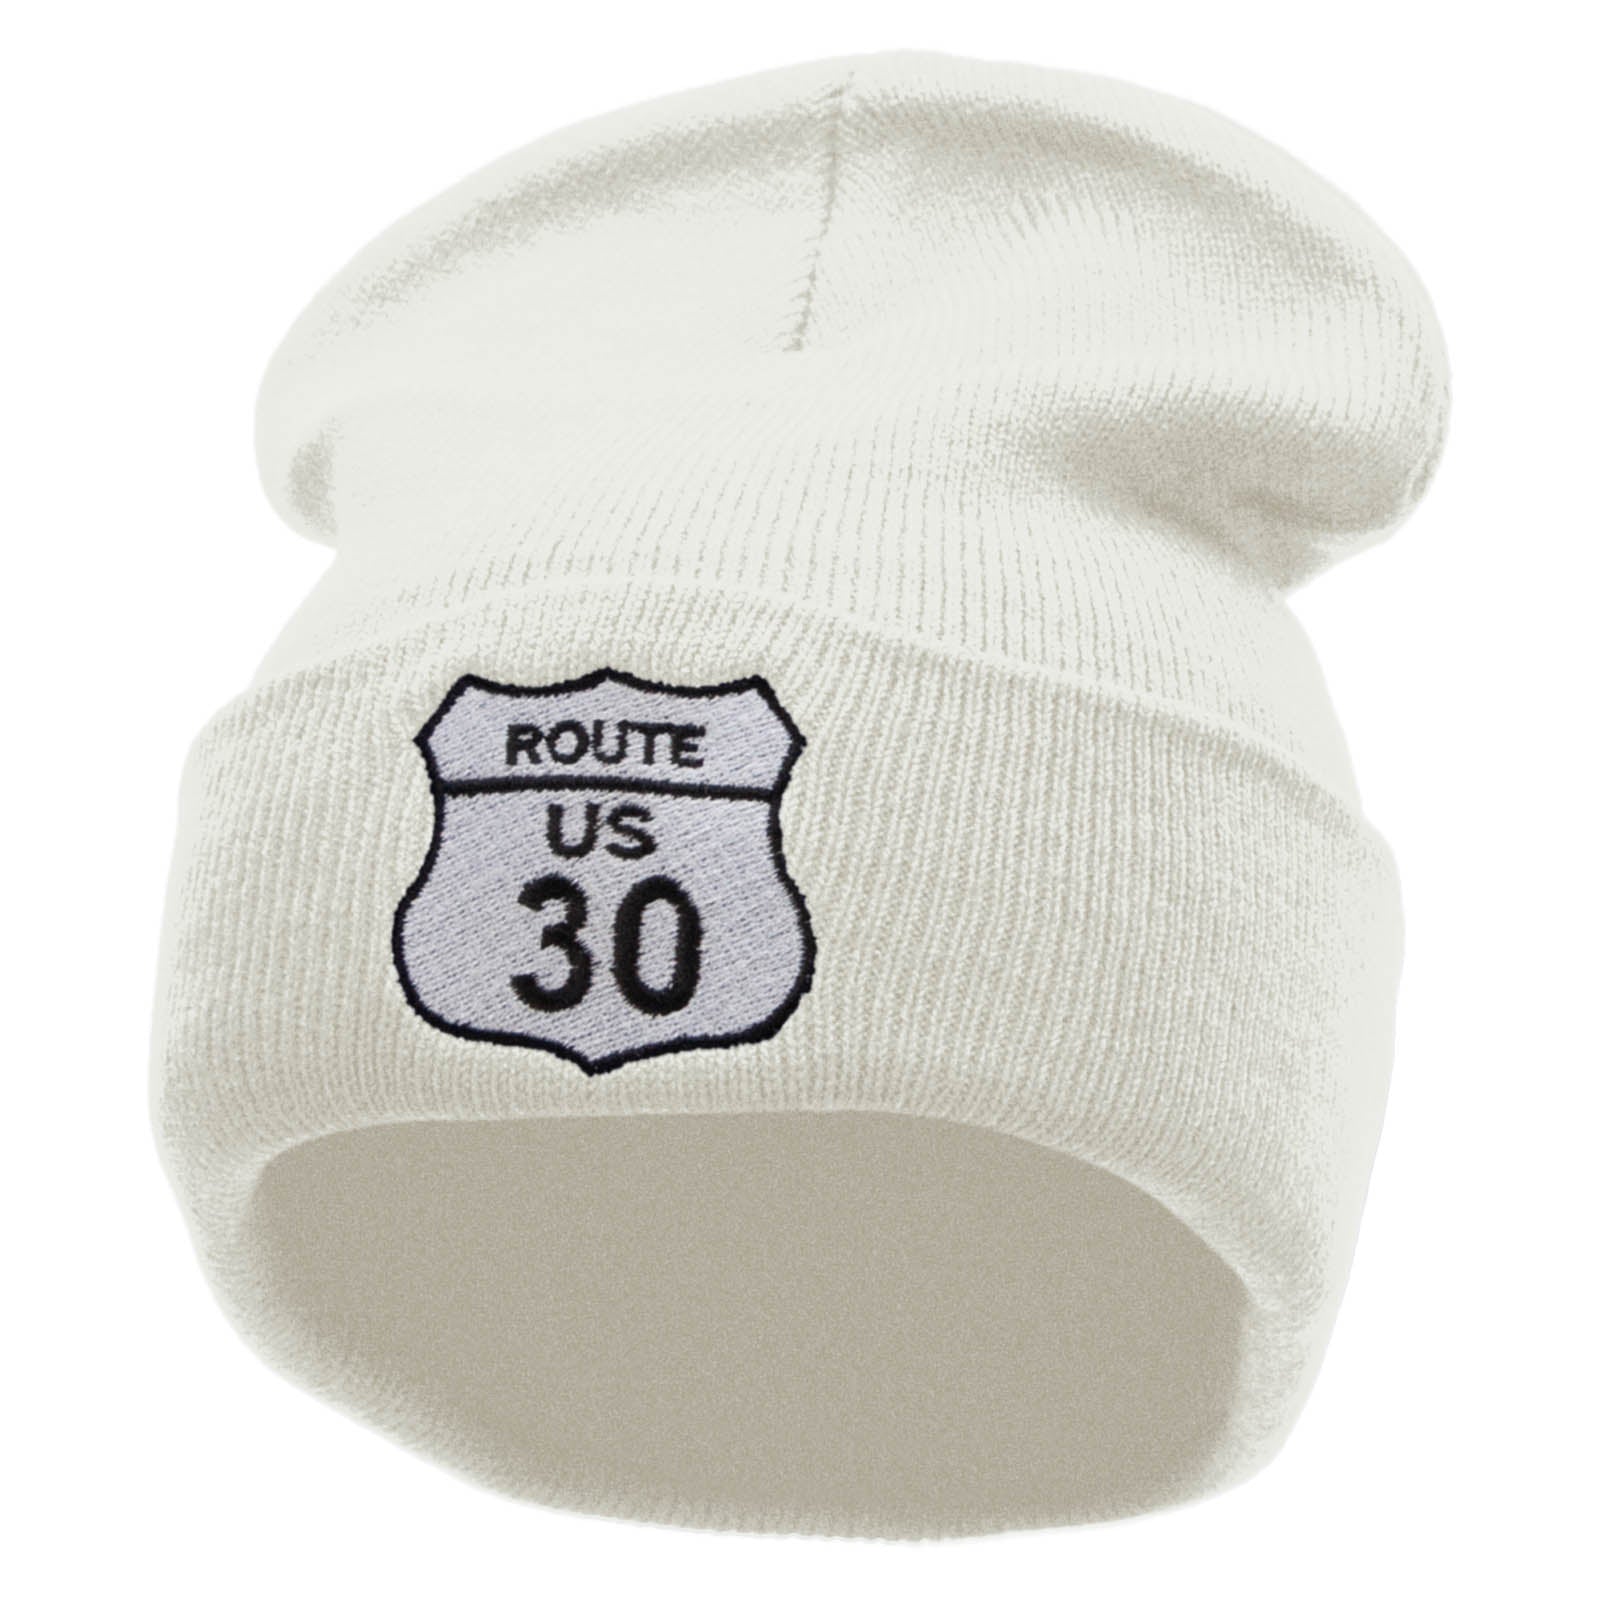 Route US 30 Embroidered 12 Inch Long Knitted Beanie - White OSFM